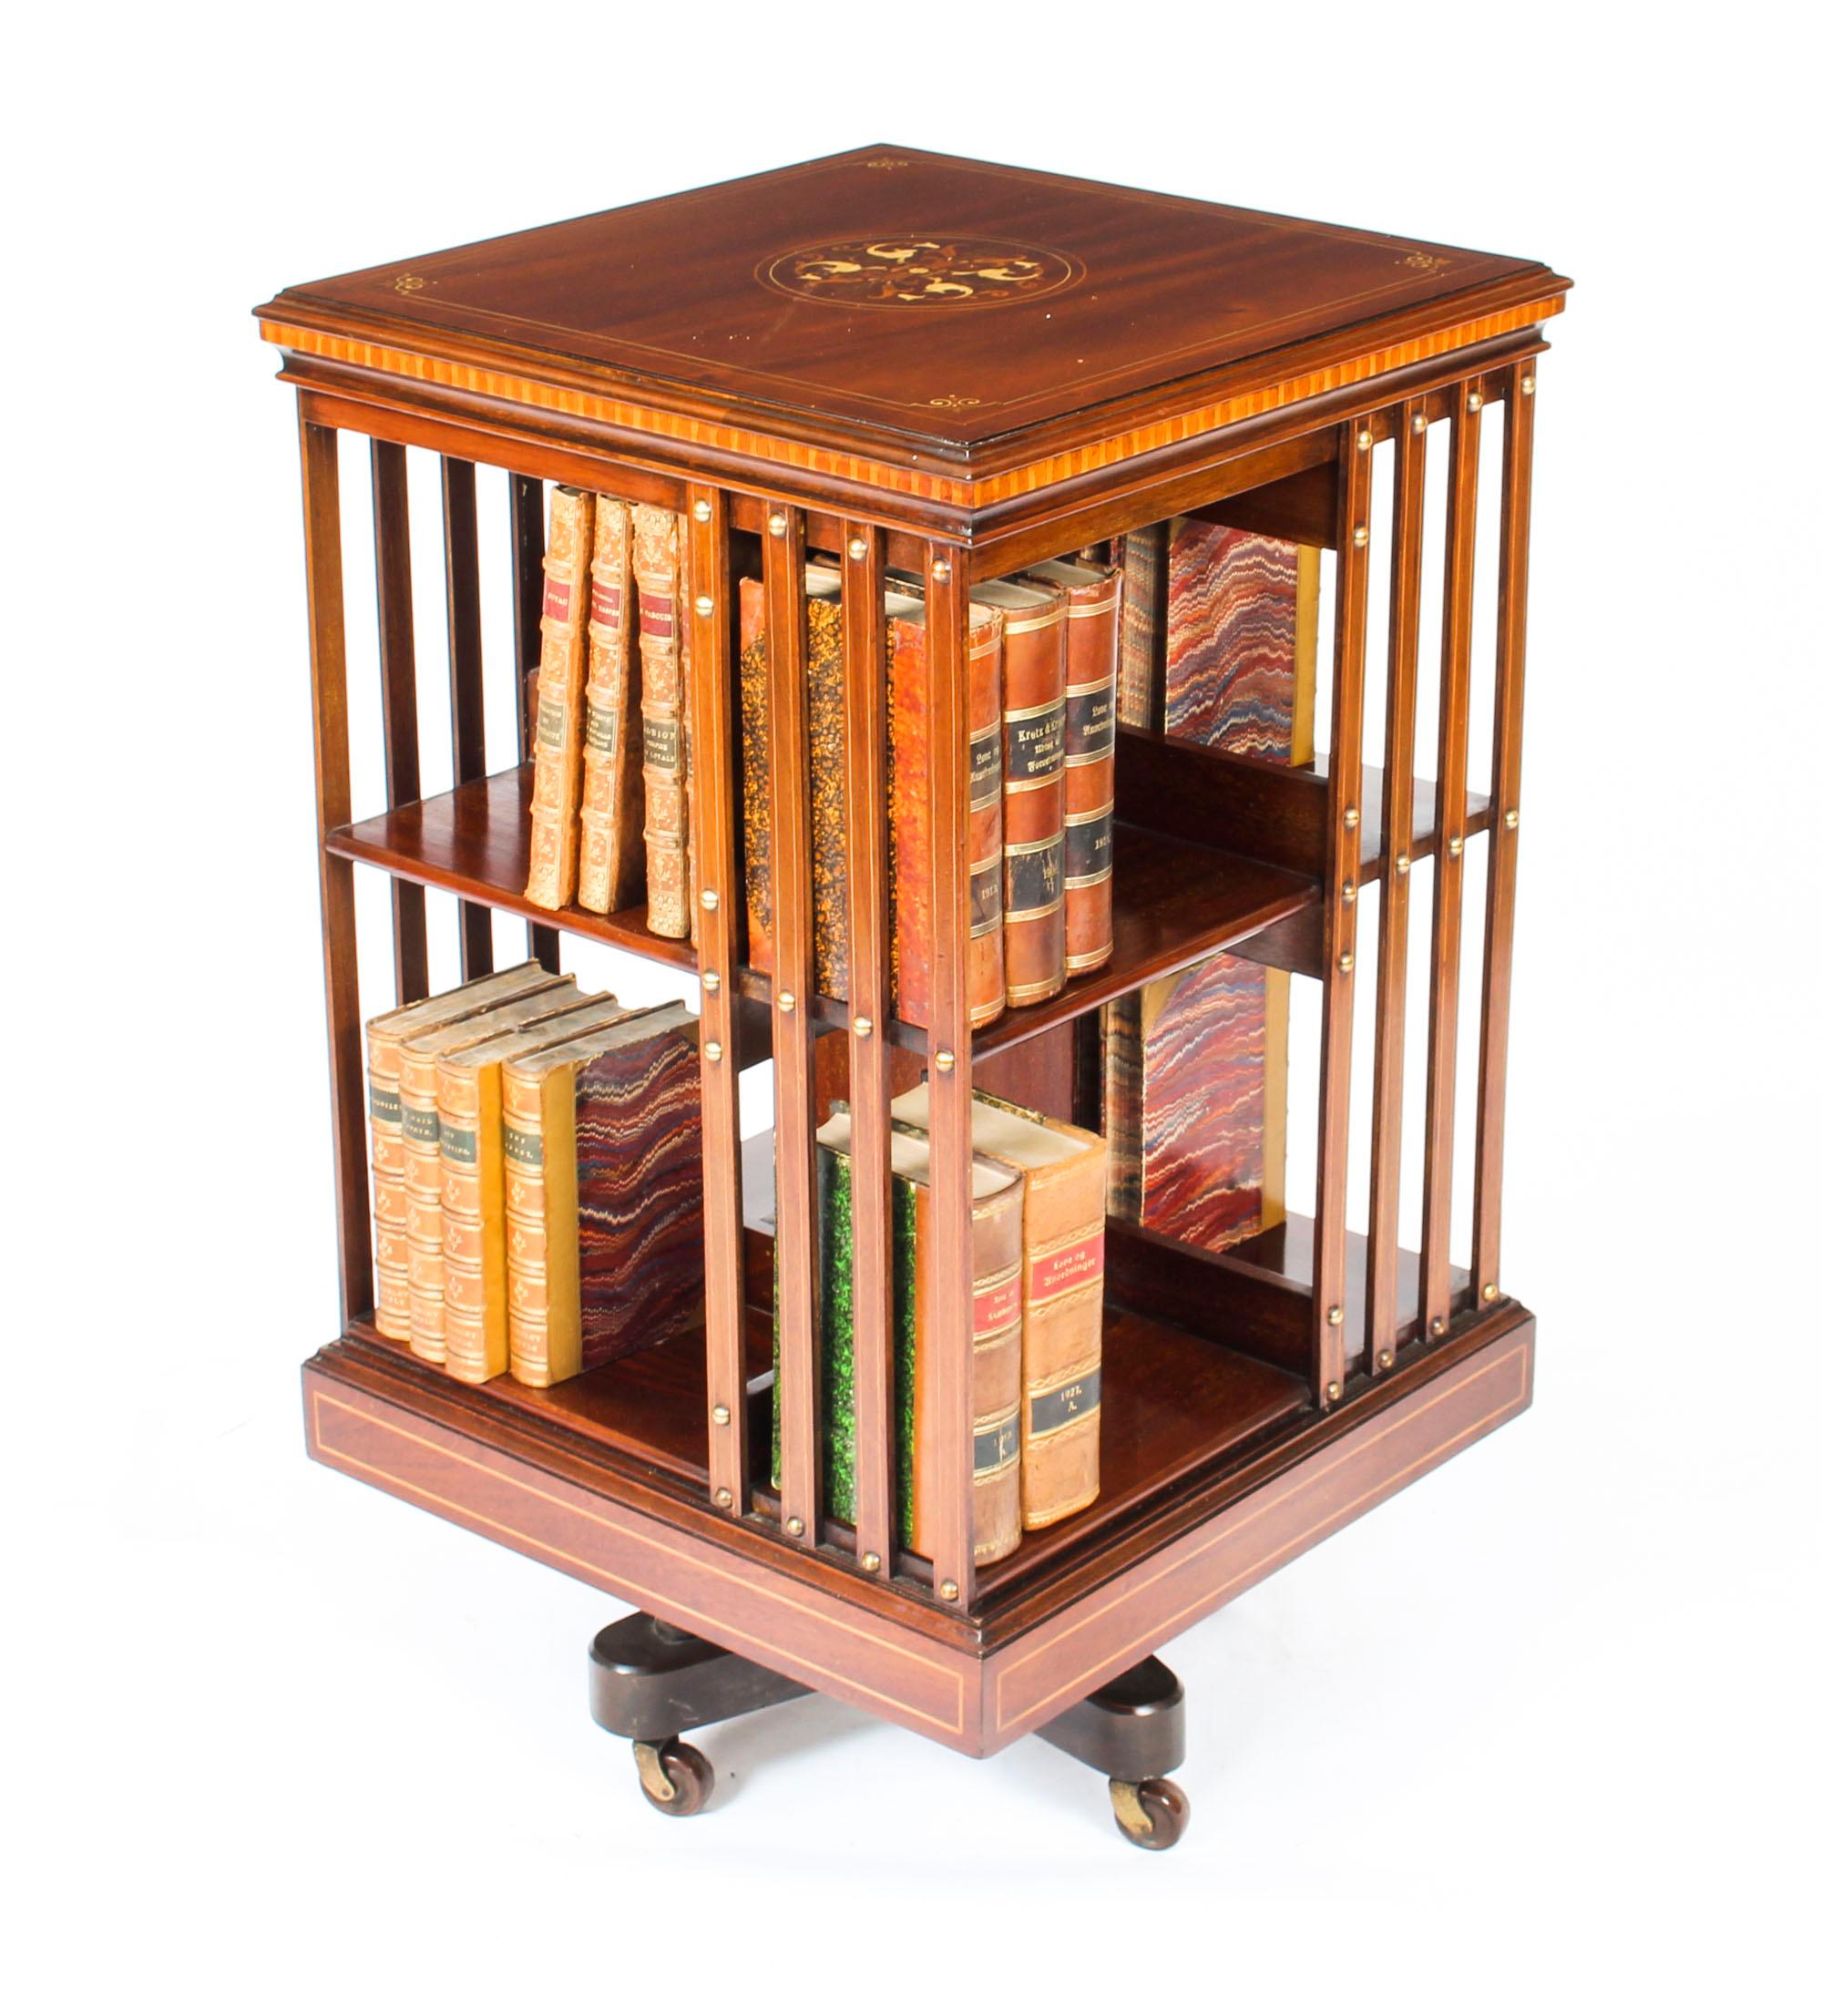 This is an exquisite antique Edwardian marquetry inlaid mahogany square revolving bookcase, circa 1900 in date.

This exquisite revolving bookcase is made of beautiful solid mahogany and the top has been masterfully inlaid with elaborate mythical